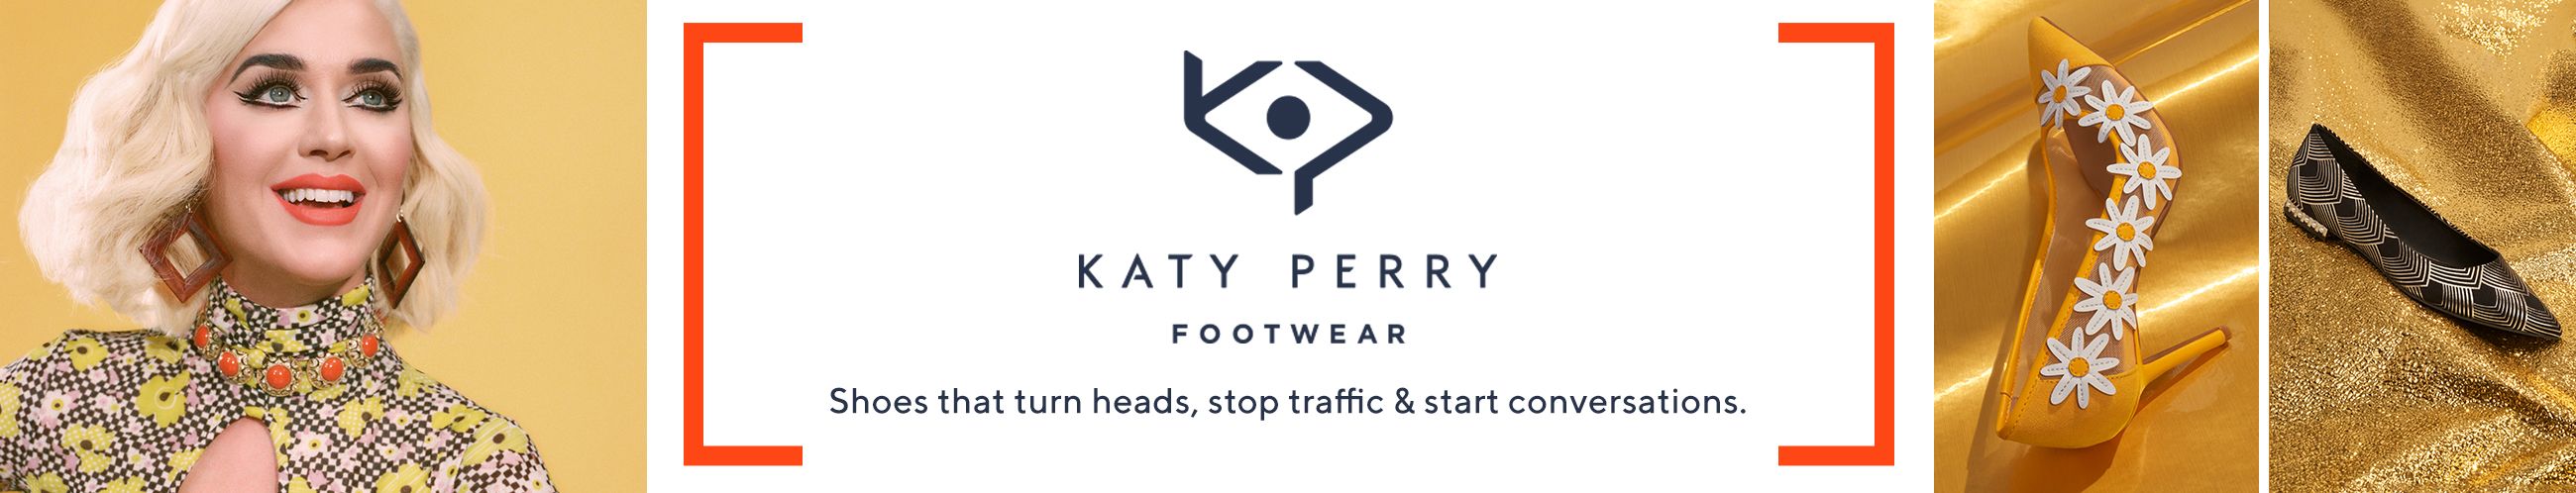 The Katy Perry Footwear Collection. Shoes that turn heads, stop traffic & start conversations.